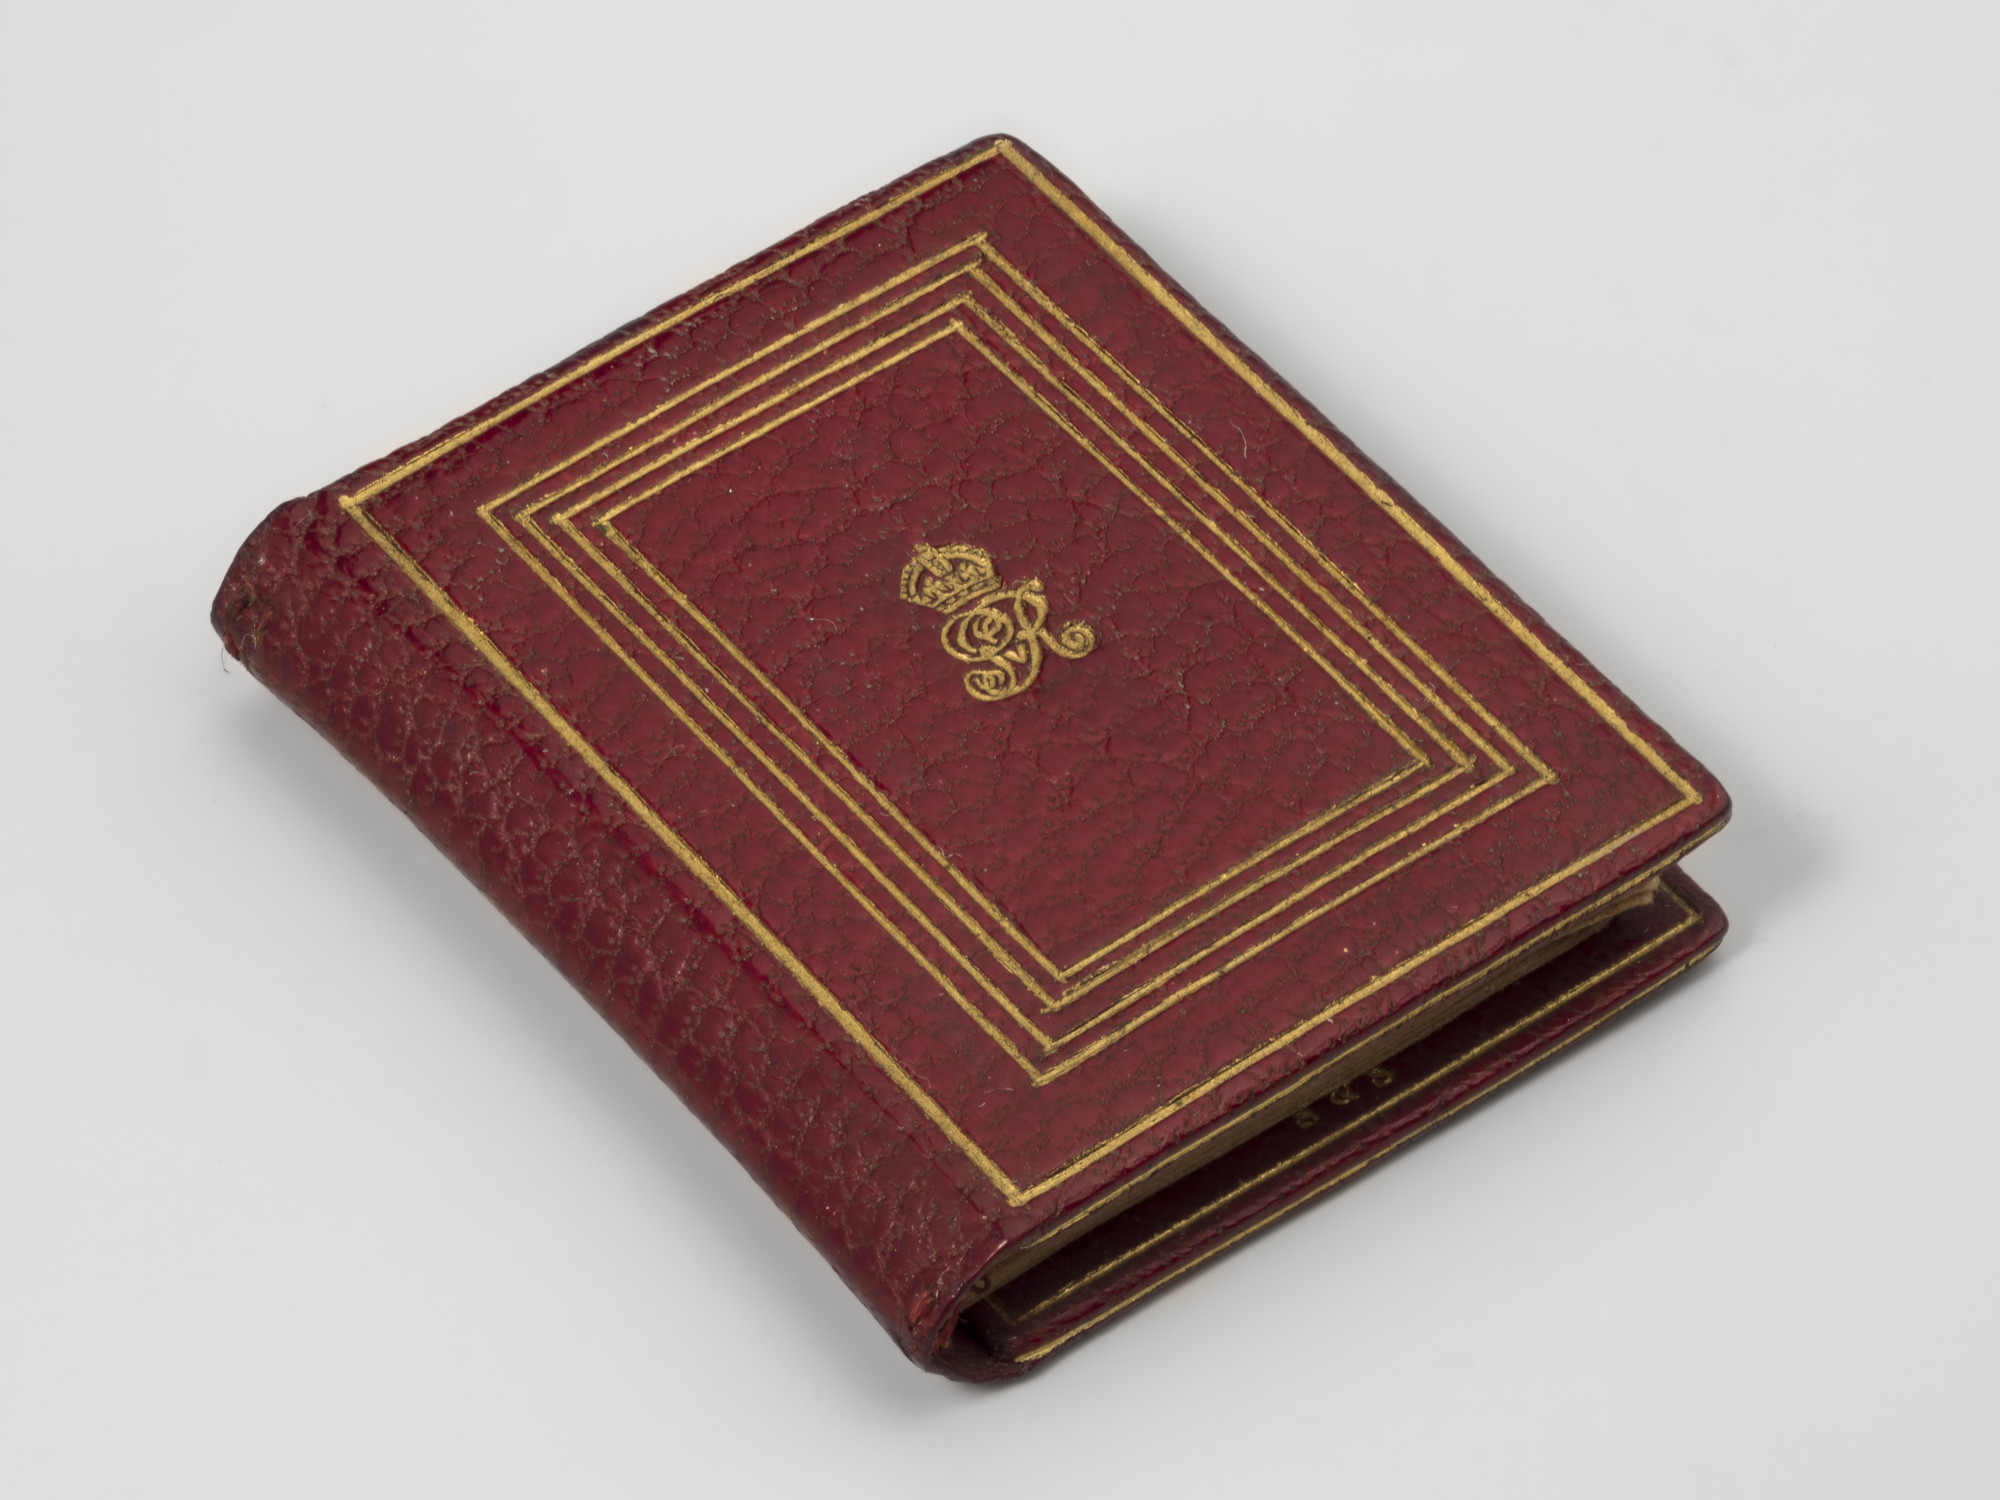 Miniature red leather blotter, tooled in gold with crowned GvR and plain line borders